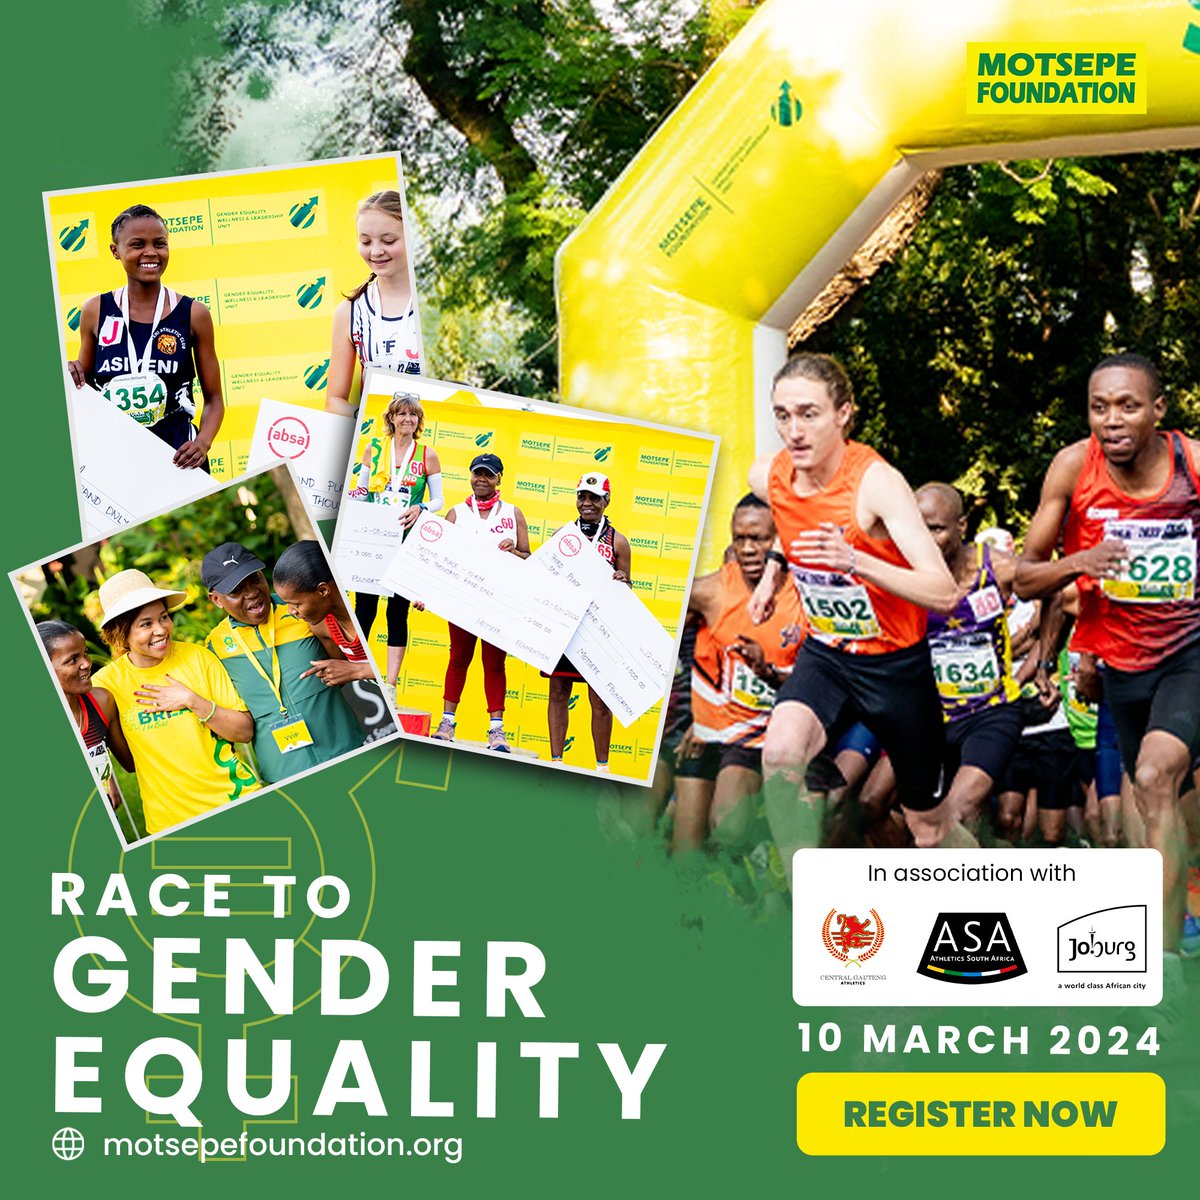 The #RacetoGenderEquality will take us on a inspiring route through Constitutional Hill and across the Nelson Mandela Bridge. Register and join a community that strives for progress and takes necessary action for positive change.

To register visit peaktiming.co.za